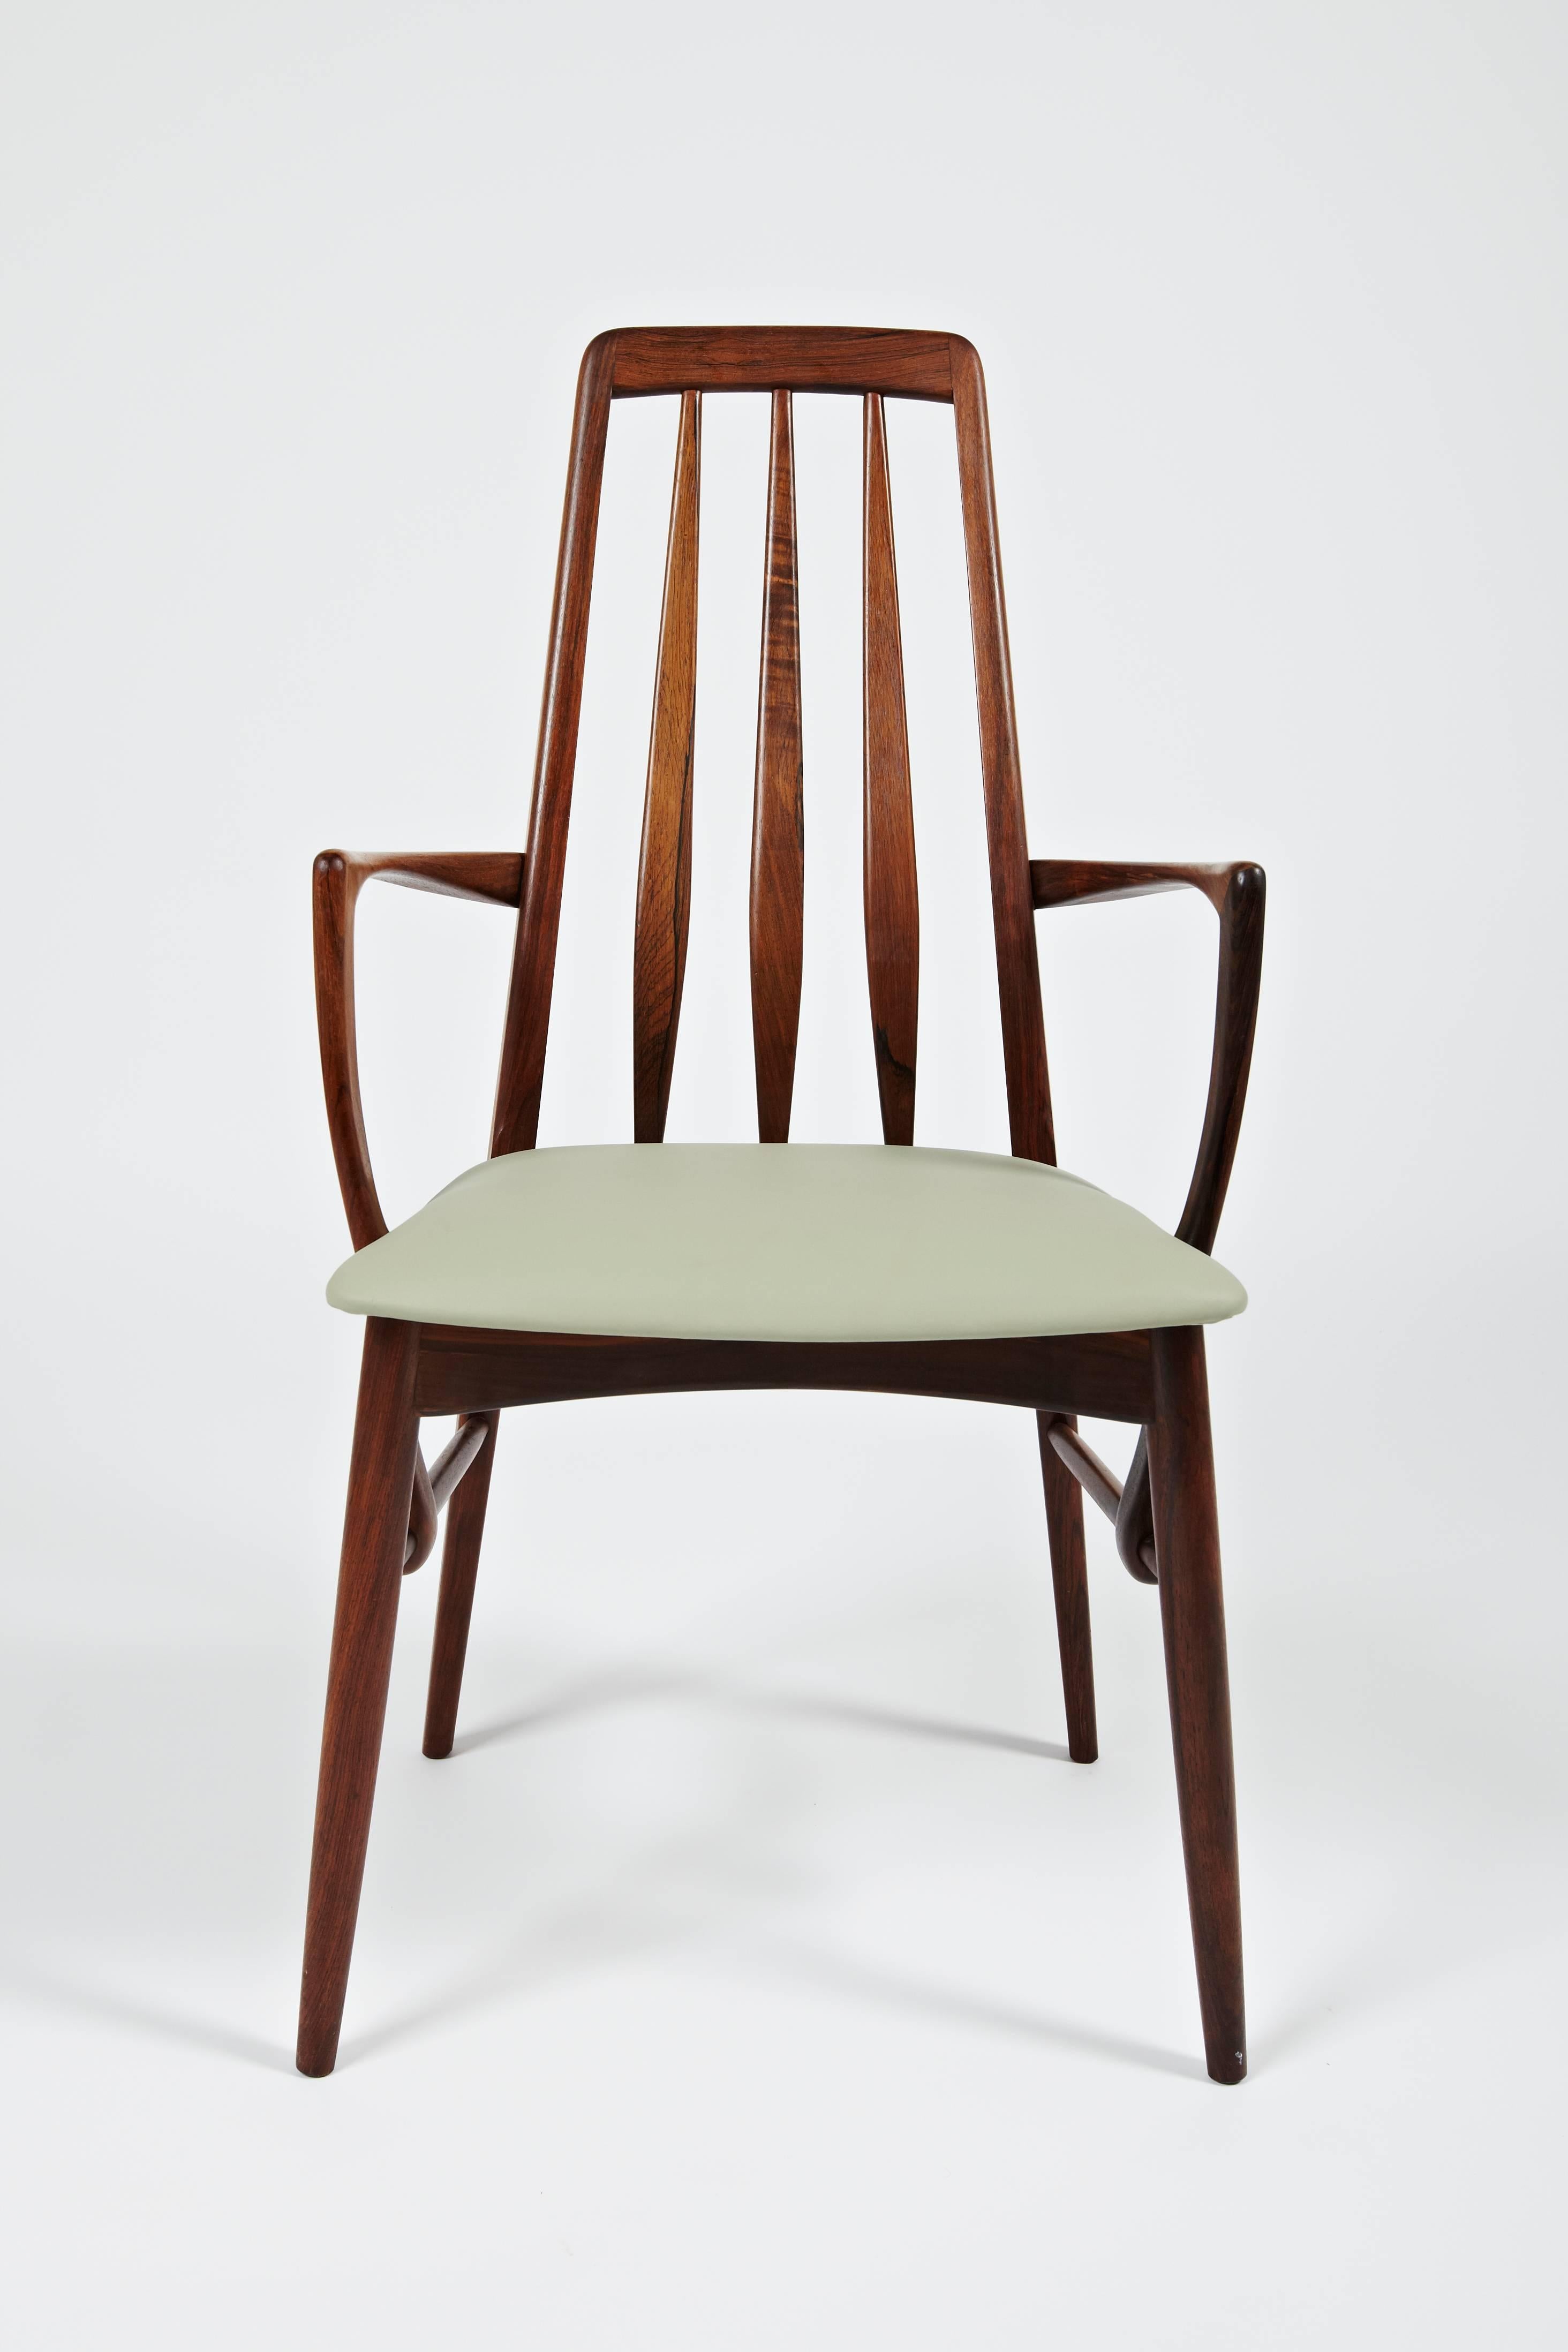 This rosewood dining chair with arms designed in 1964 by Niels Kofoed and made by his brother's workshop Kofoed's Mobelfabrik has had its seat reupholstered in a light green leather.

 